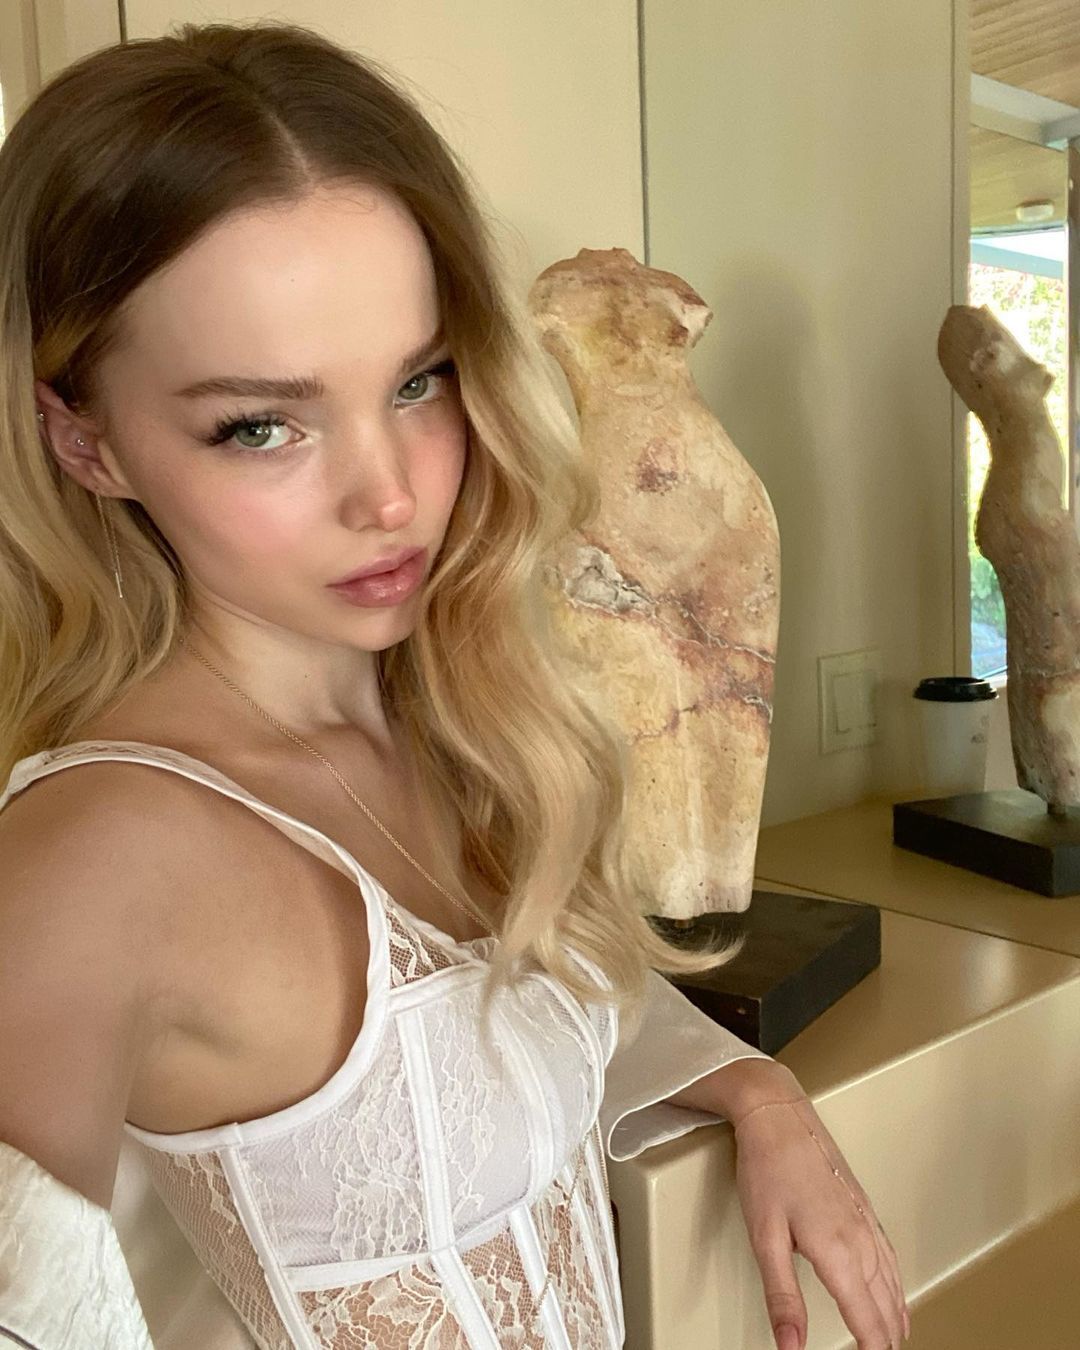 Dove Cameron rocks a white lace bustier in front of a statue.